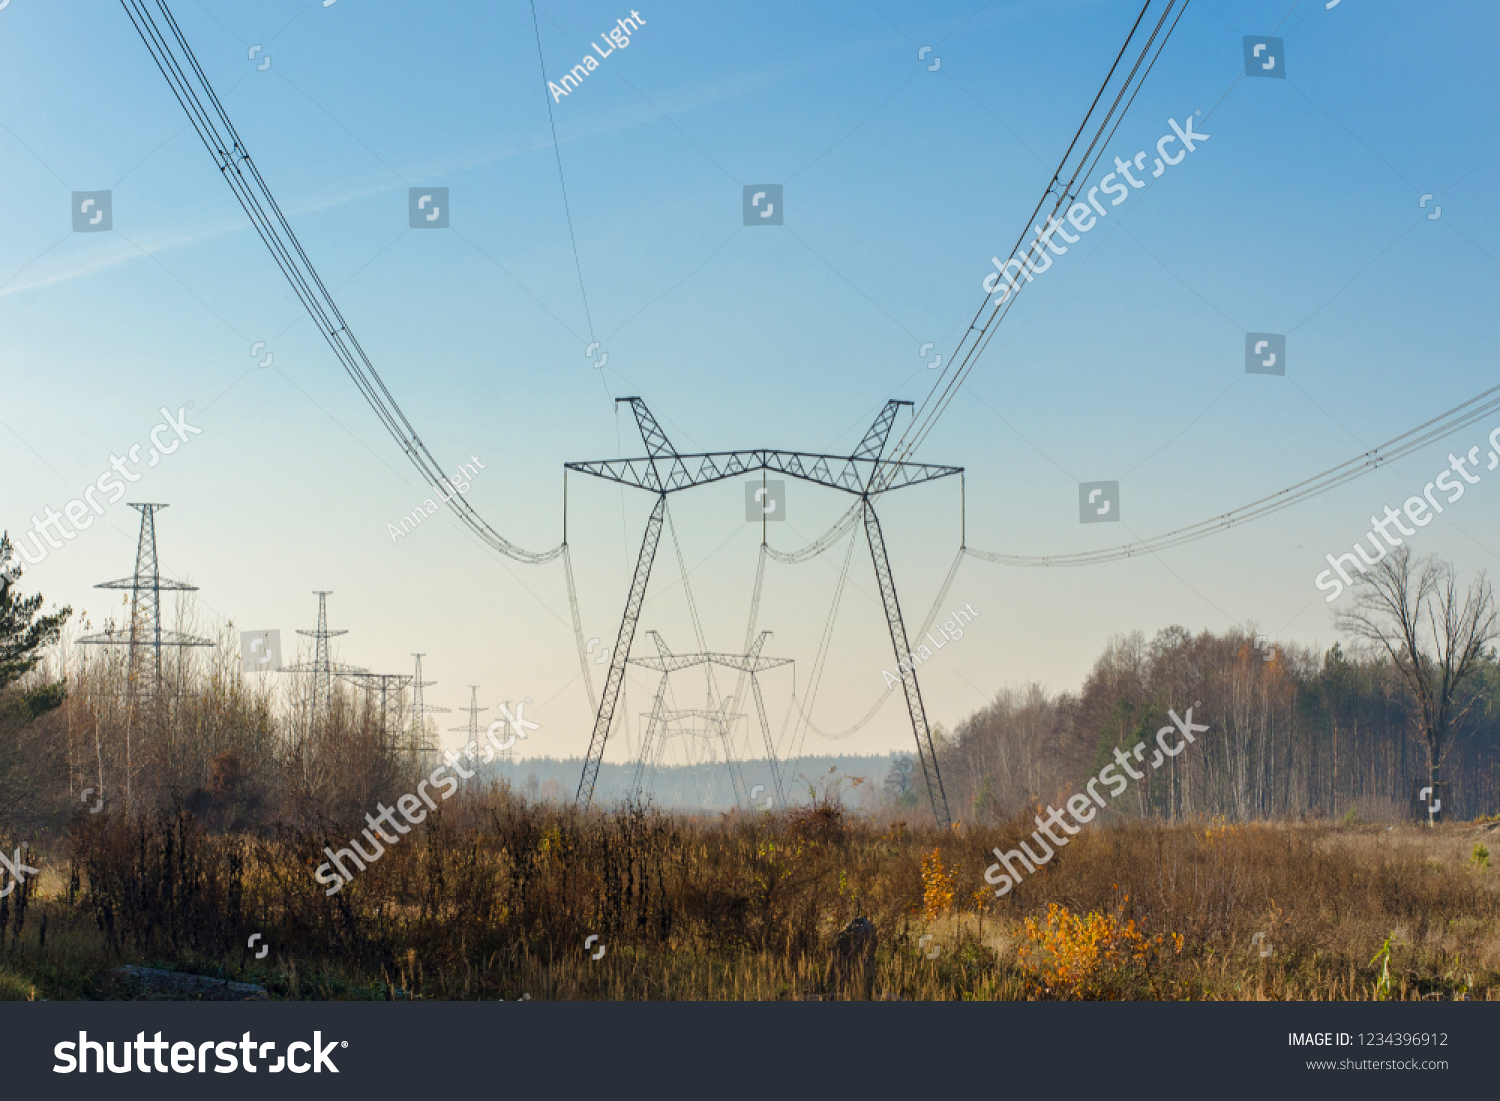 High voltage powerline against the forest. #1234396912